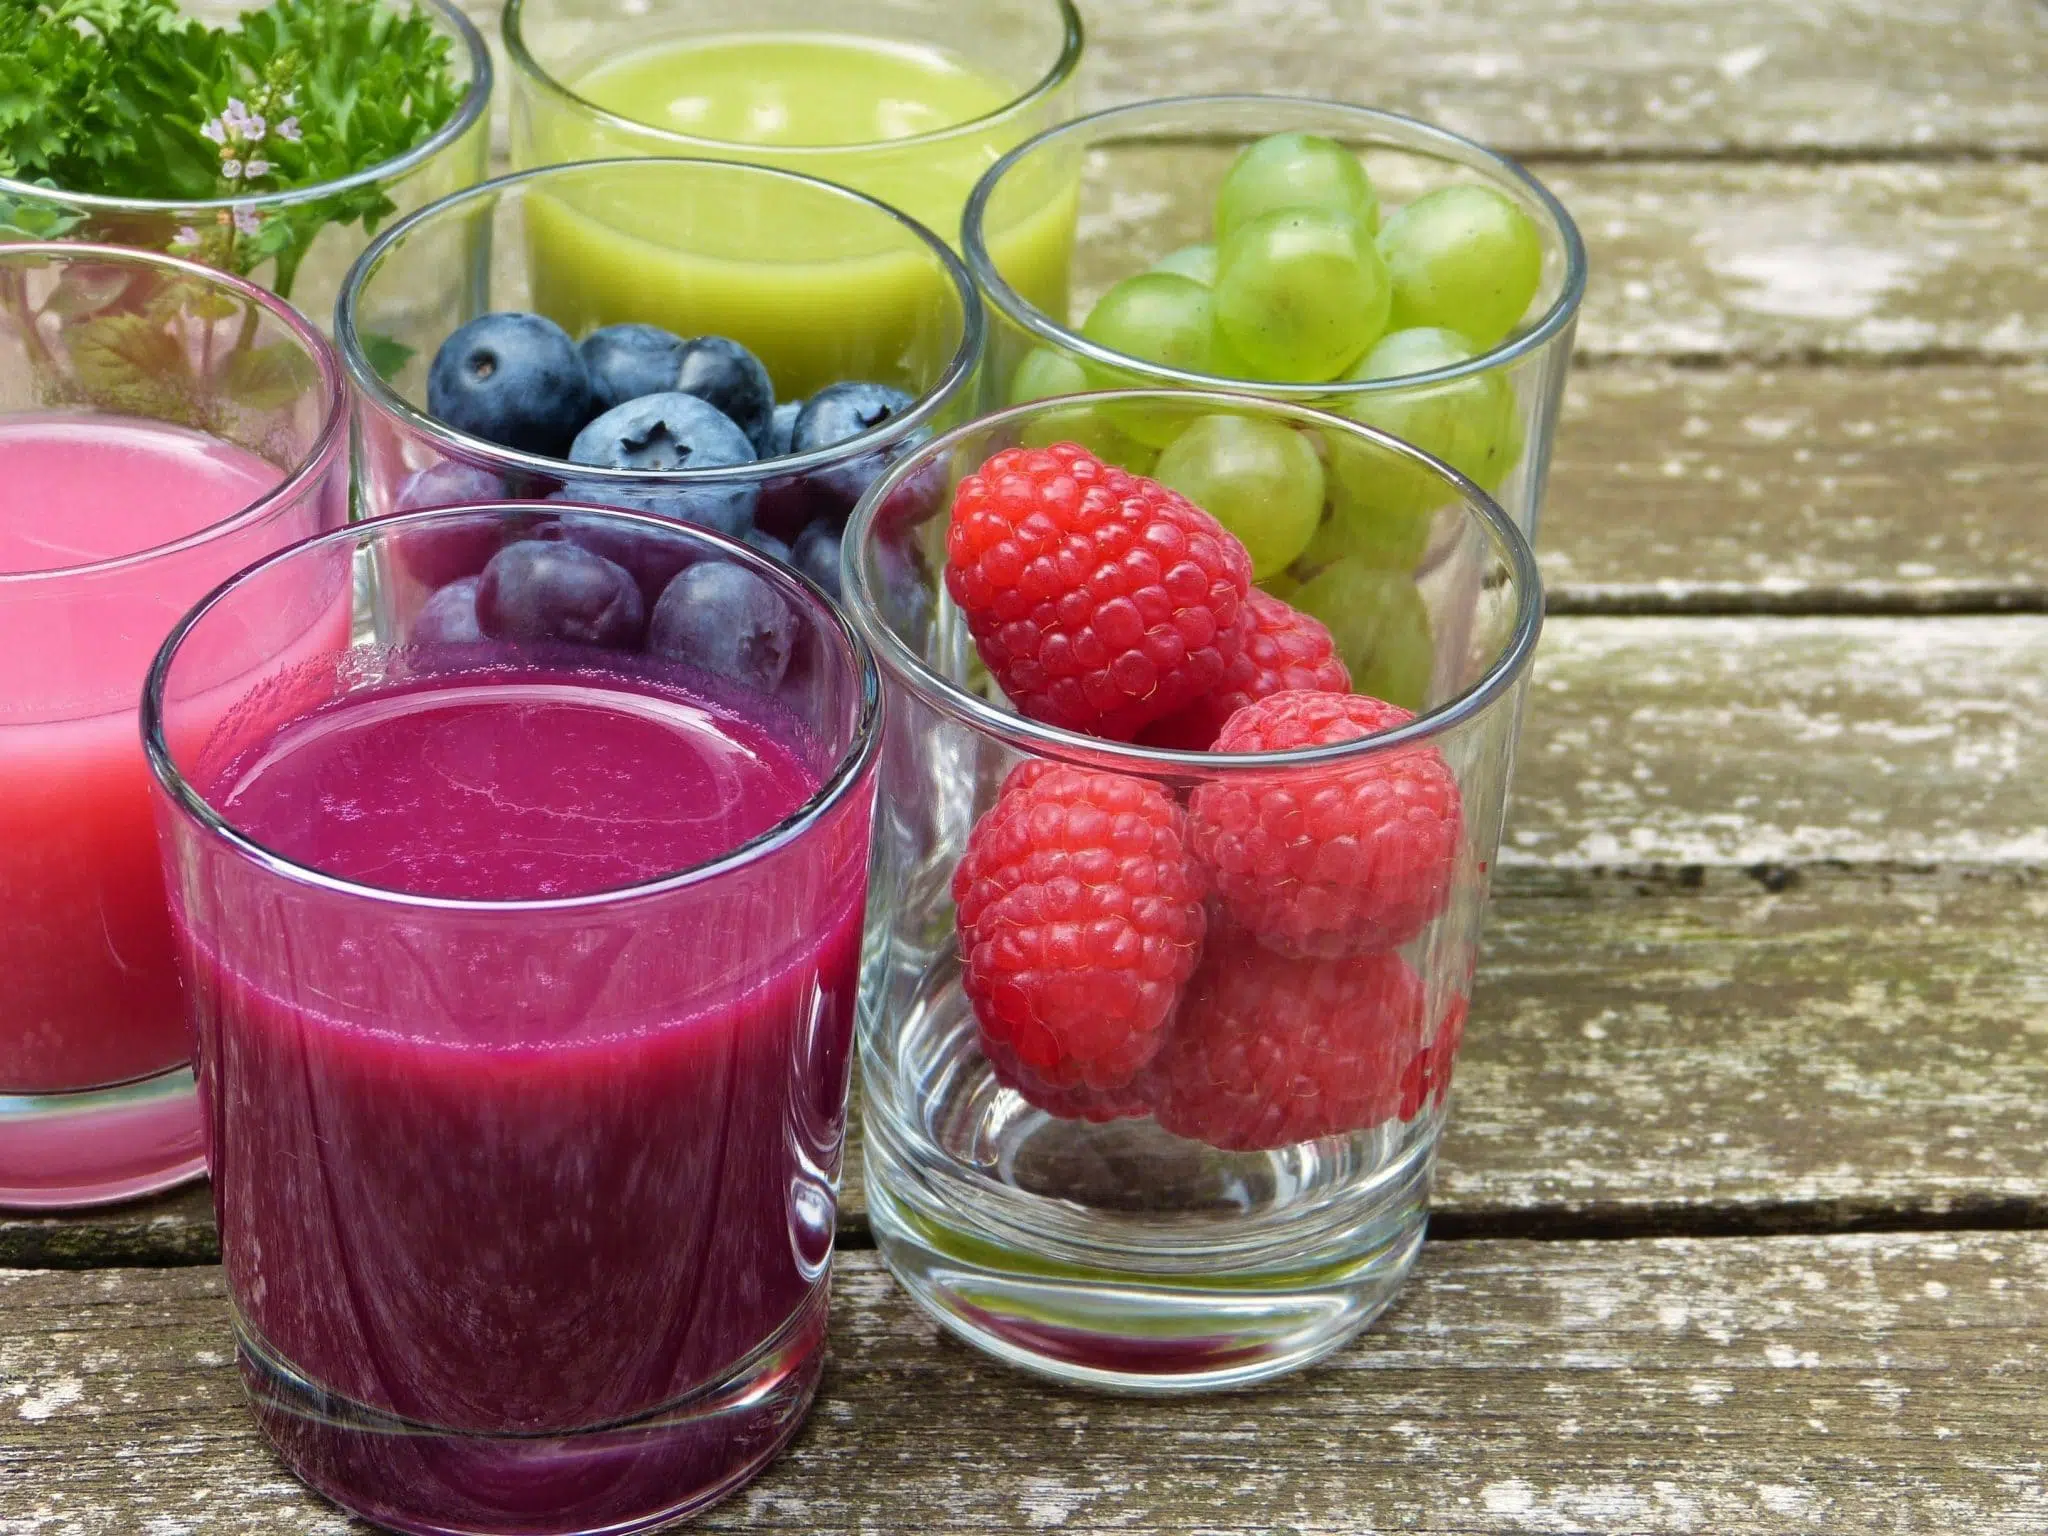 Juicing For Weight Loss And Your Health: Facts You Should Know